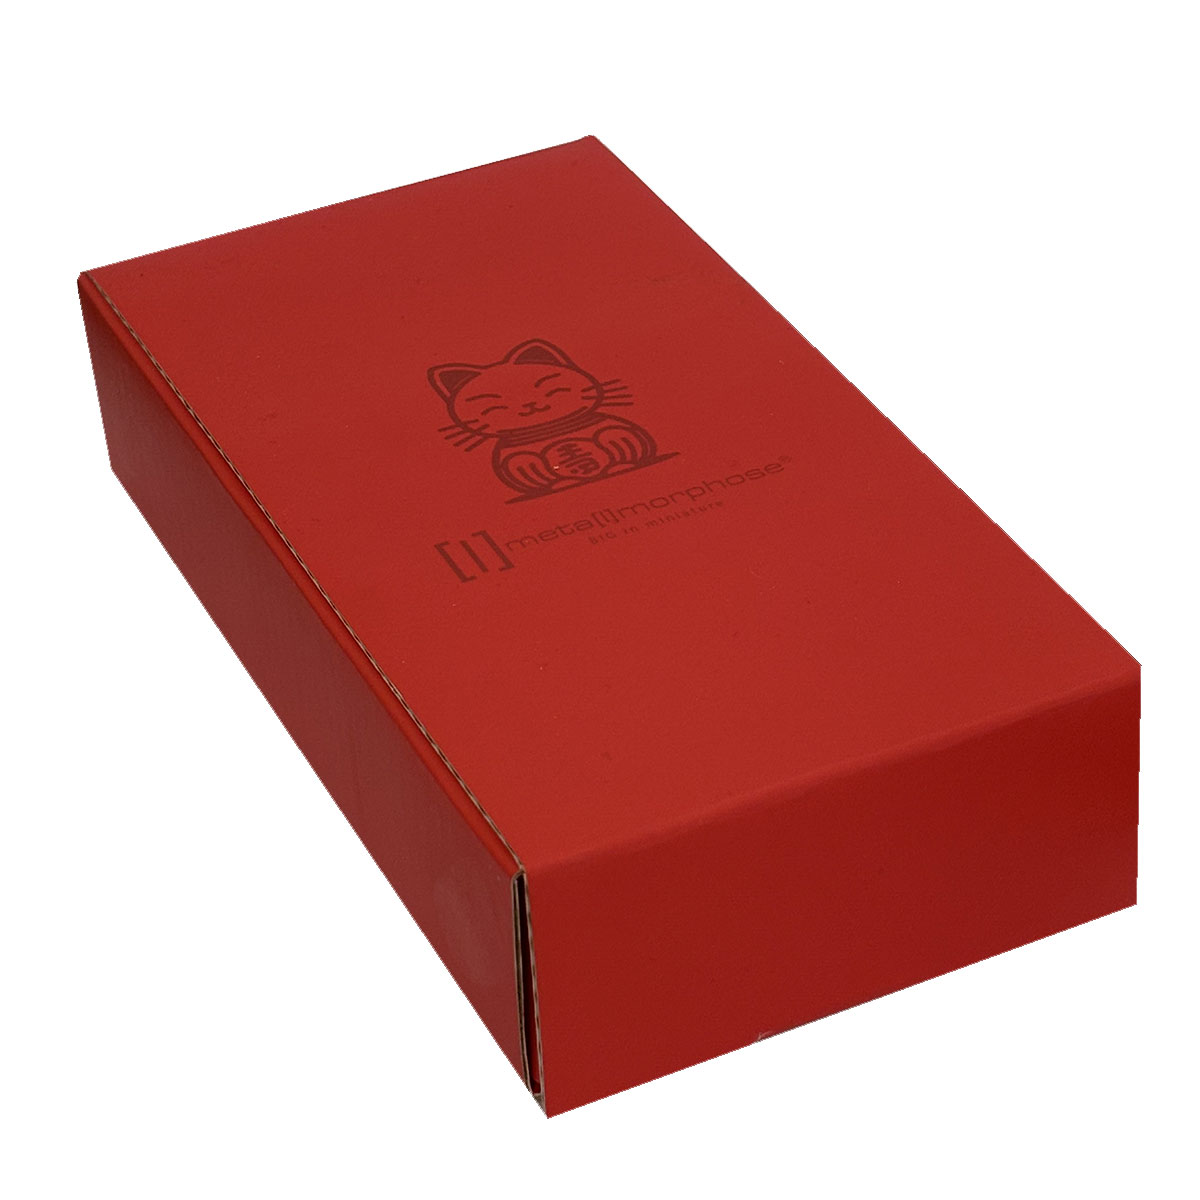 Gift Set Lucky Cat Keychain and Bookmark